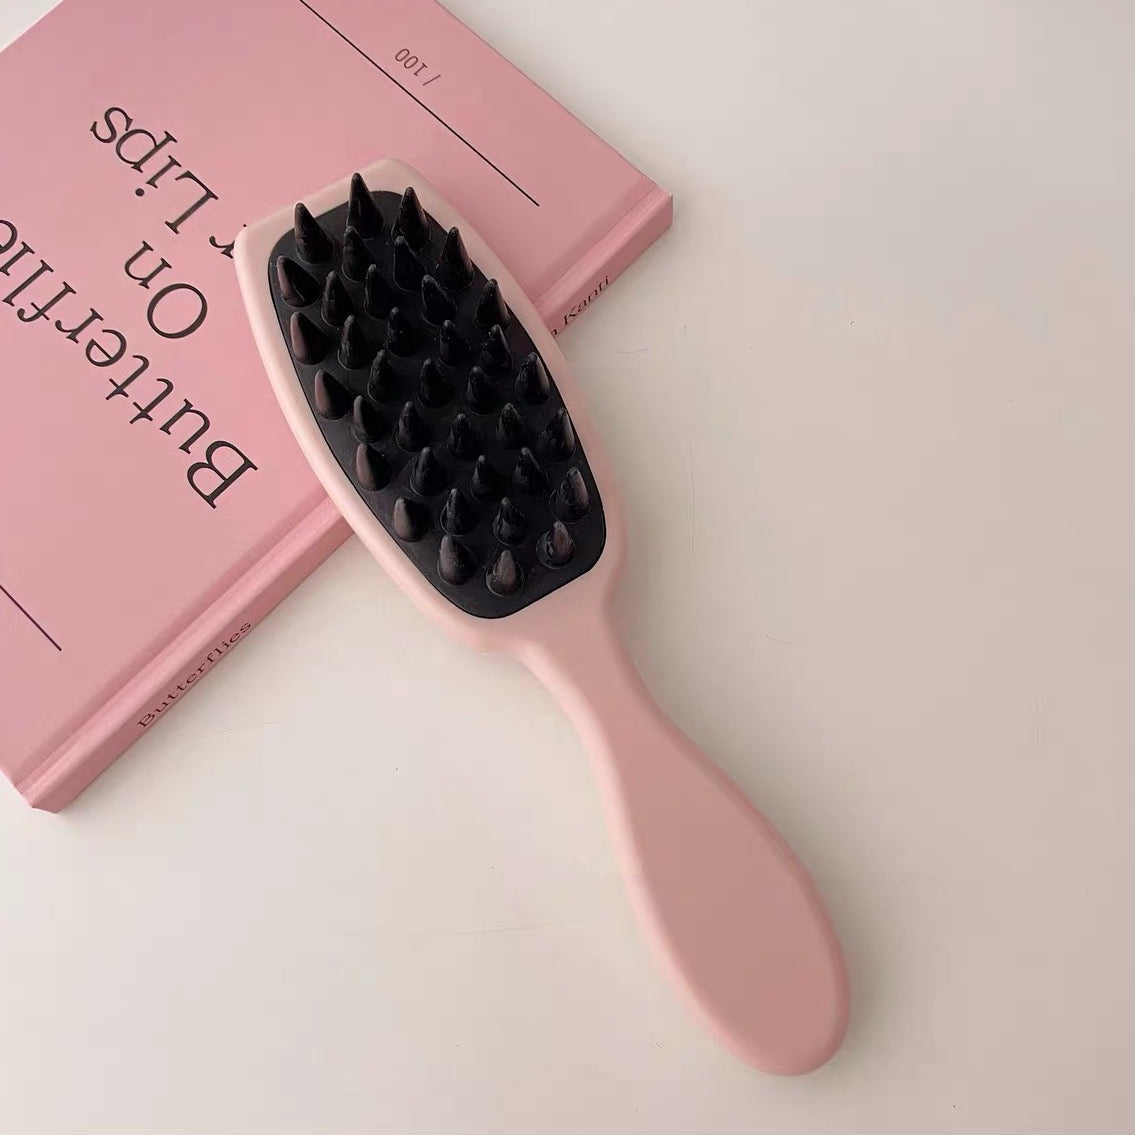 Long-handled Scalp Massage and Cleansing Comb - Ergonomic design for soothing scalp massage and hair cleansing. Made from high-quality materials. Size: 20.5 x 6cm